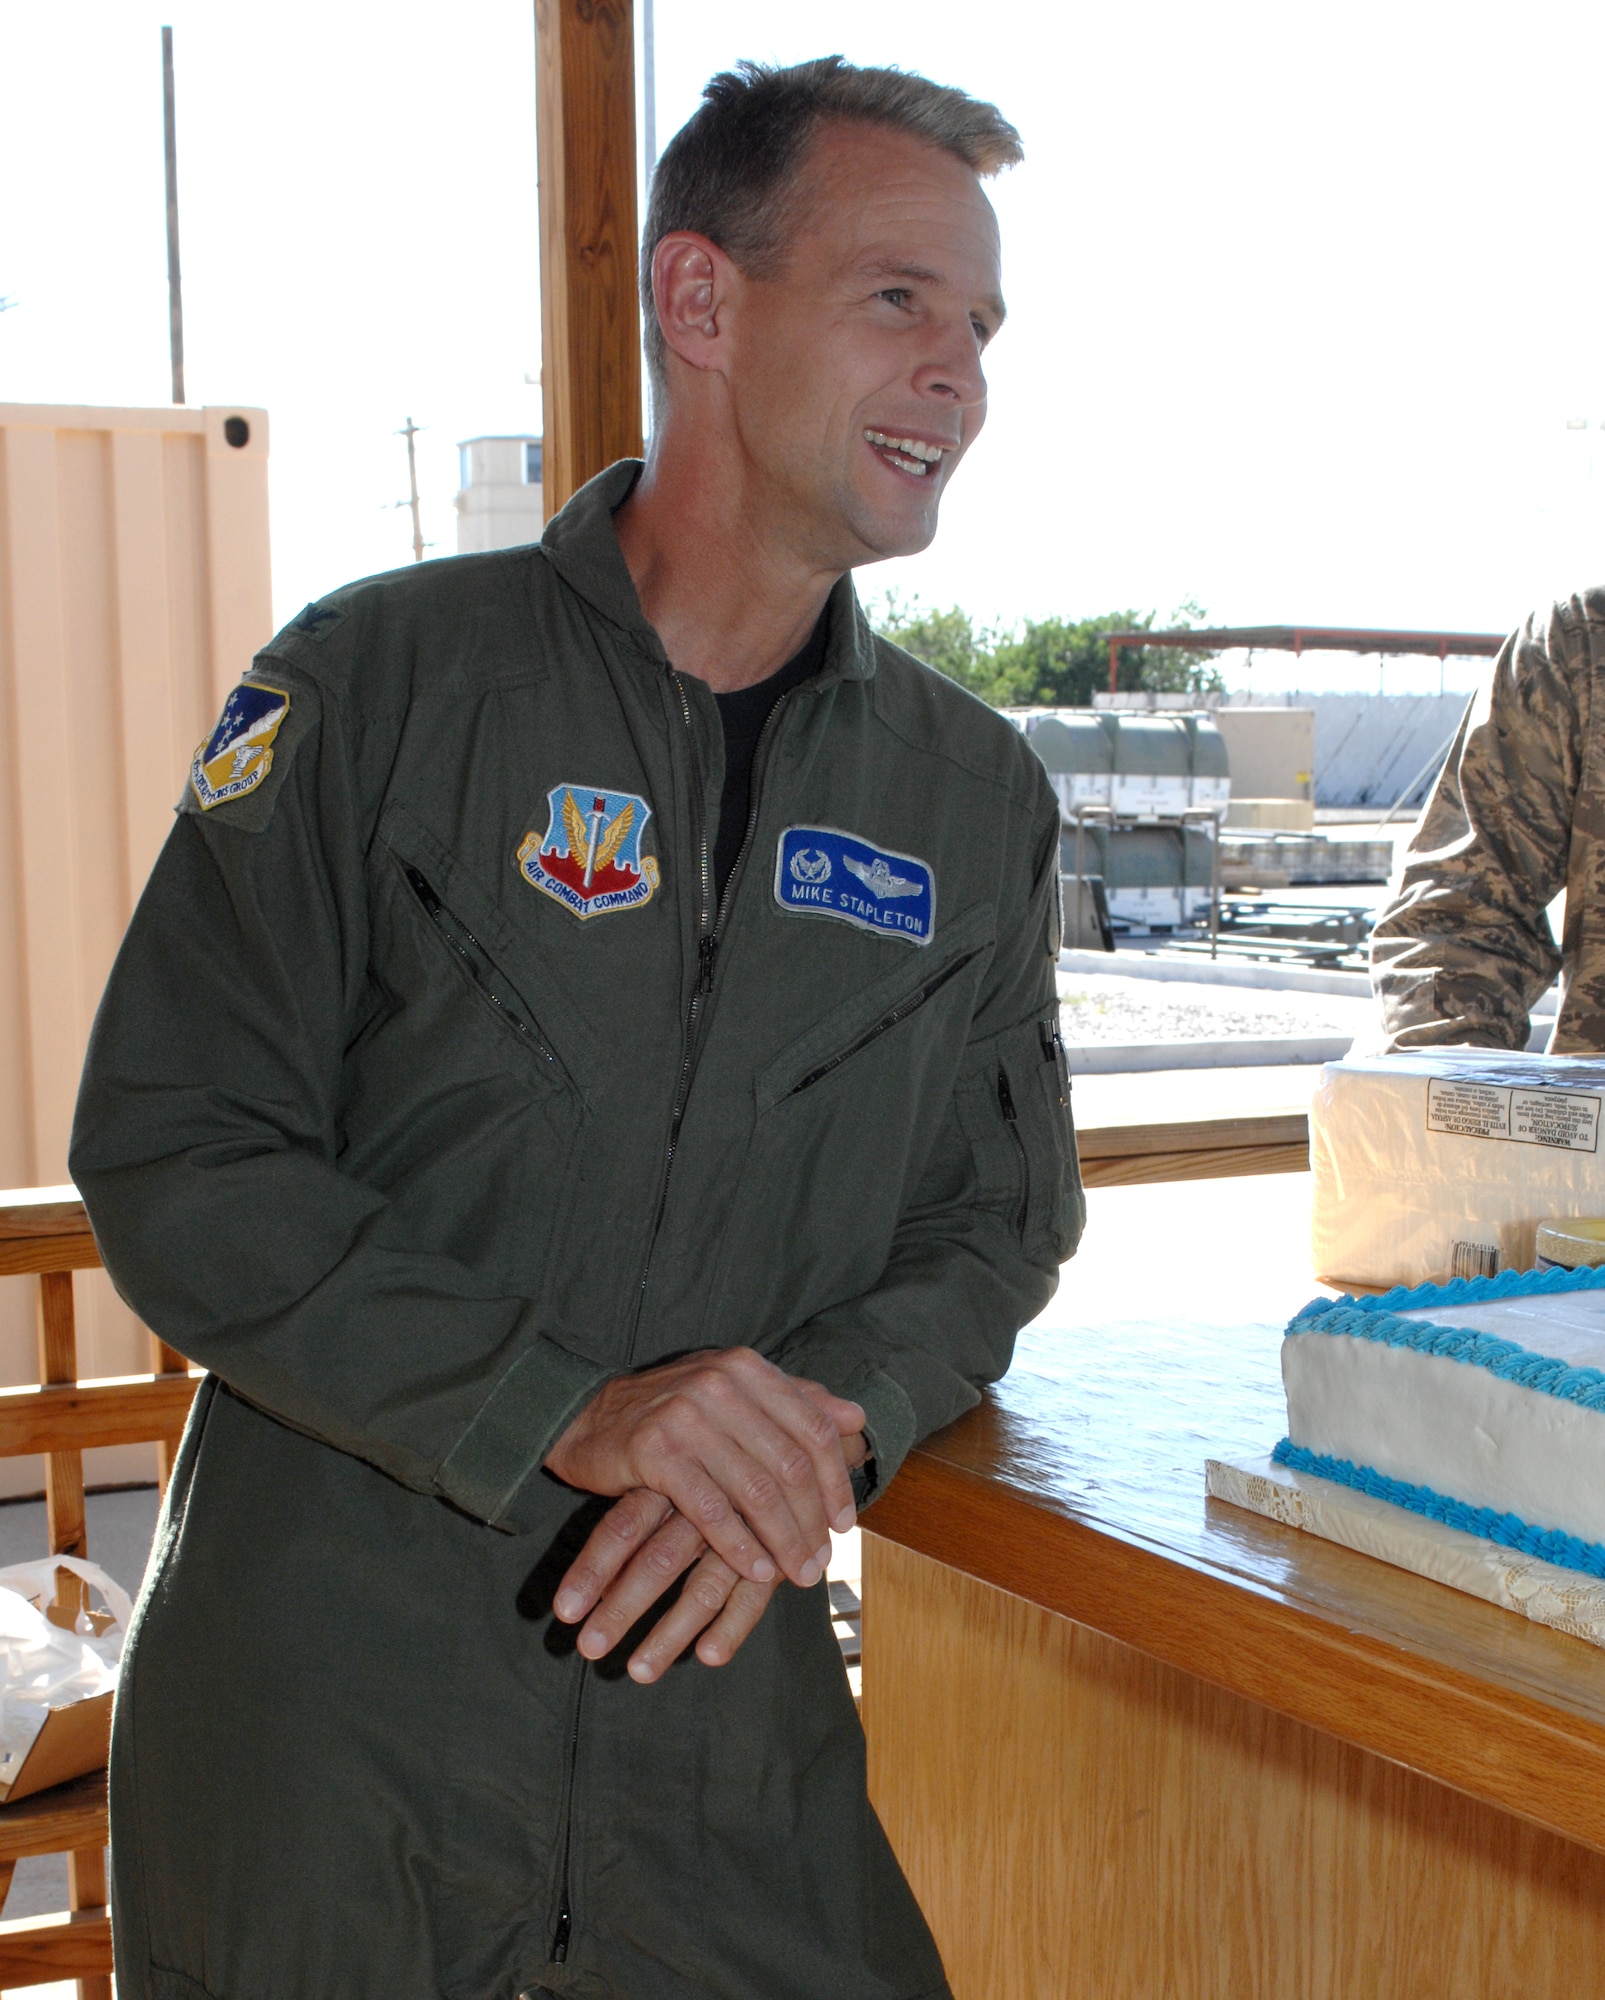 Col. Michael Stapleton, 49th Operations Group commander, speaks at the Air Force birthday celebration outside the 7th Fighter Squadron at Holloman Air Force Base, N.M., September 16. The squadron held a small celebration with snacks, drinks and birthday cake in celebration of the Air Force?s birthday which is officially September 18, 1947. (U.S. Air Force photo/Airman Sondra M. Escutia)